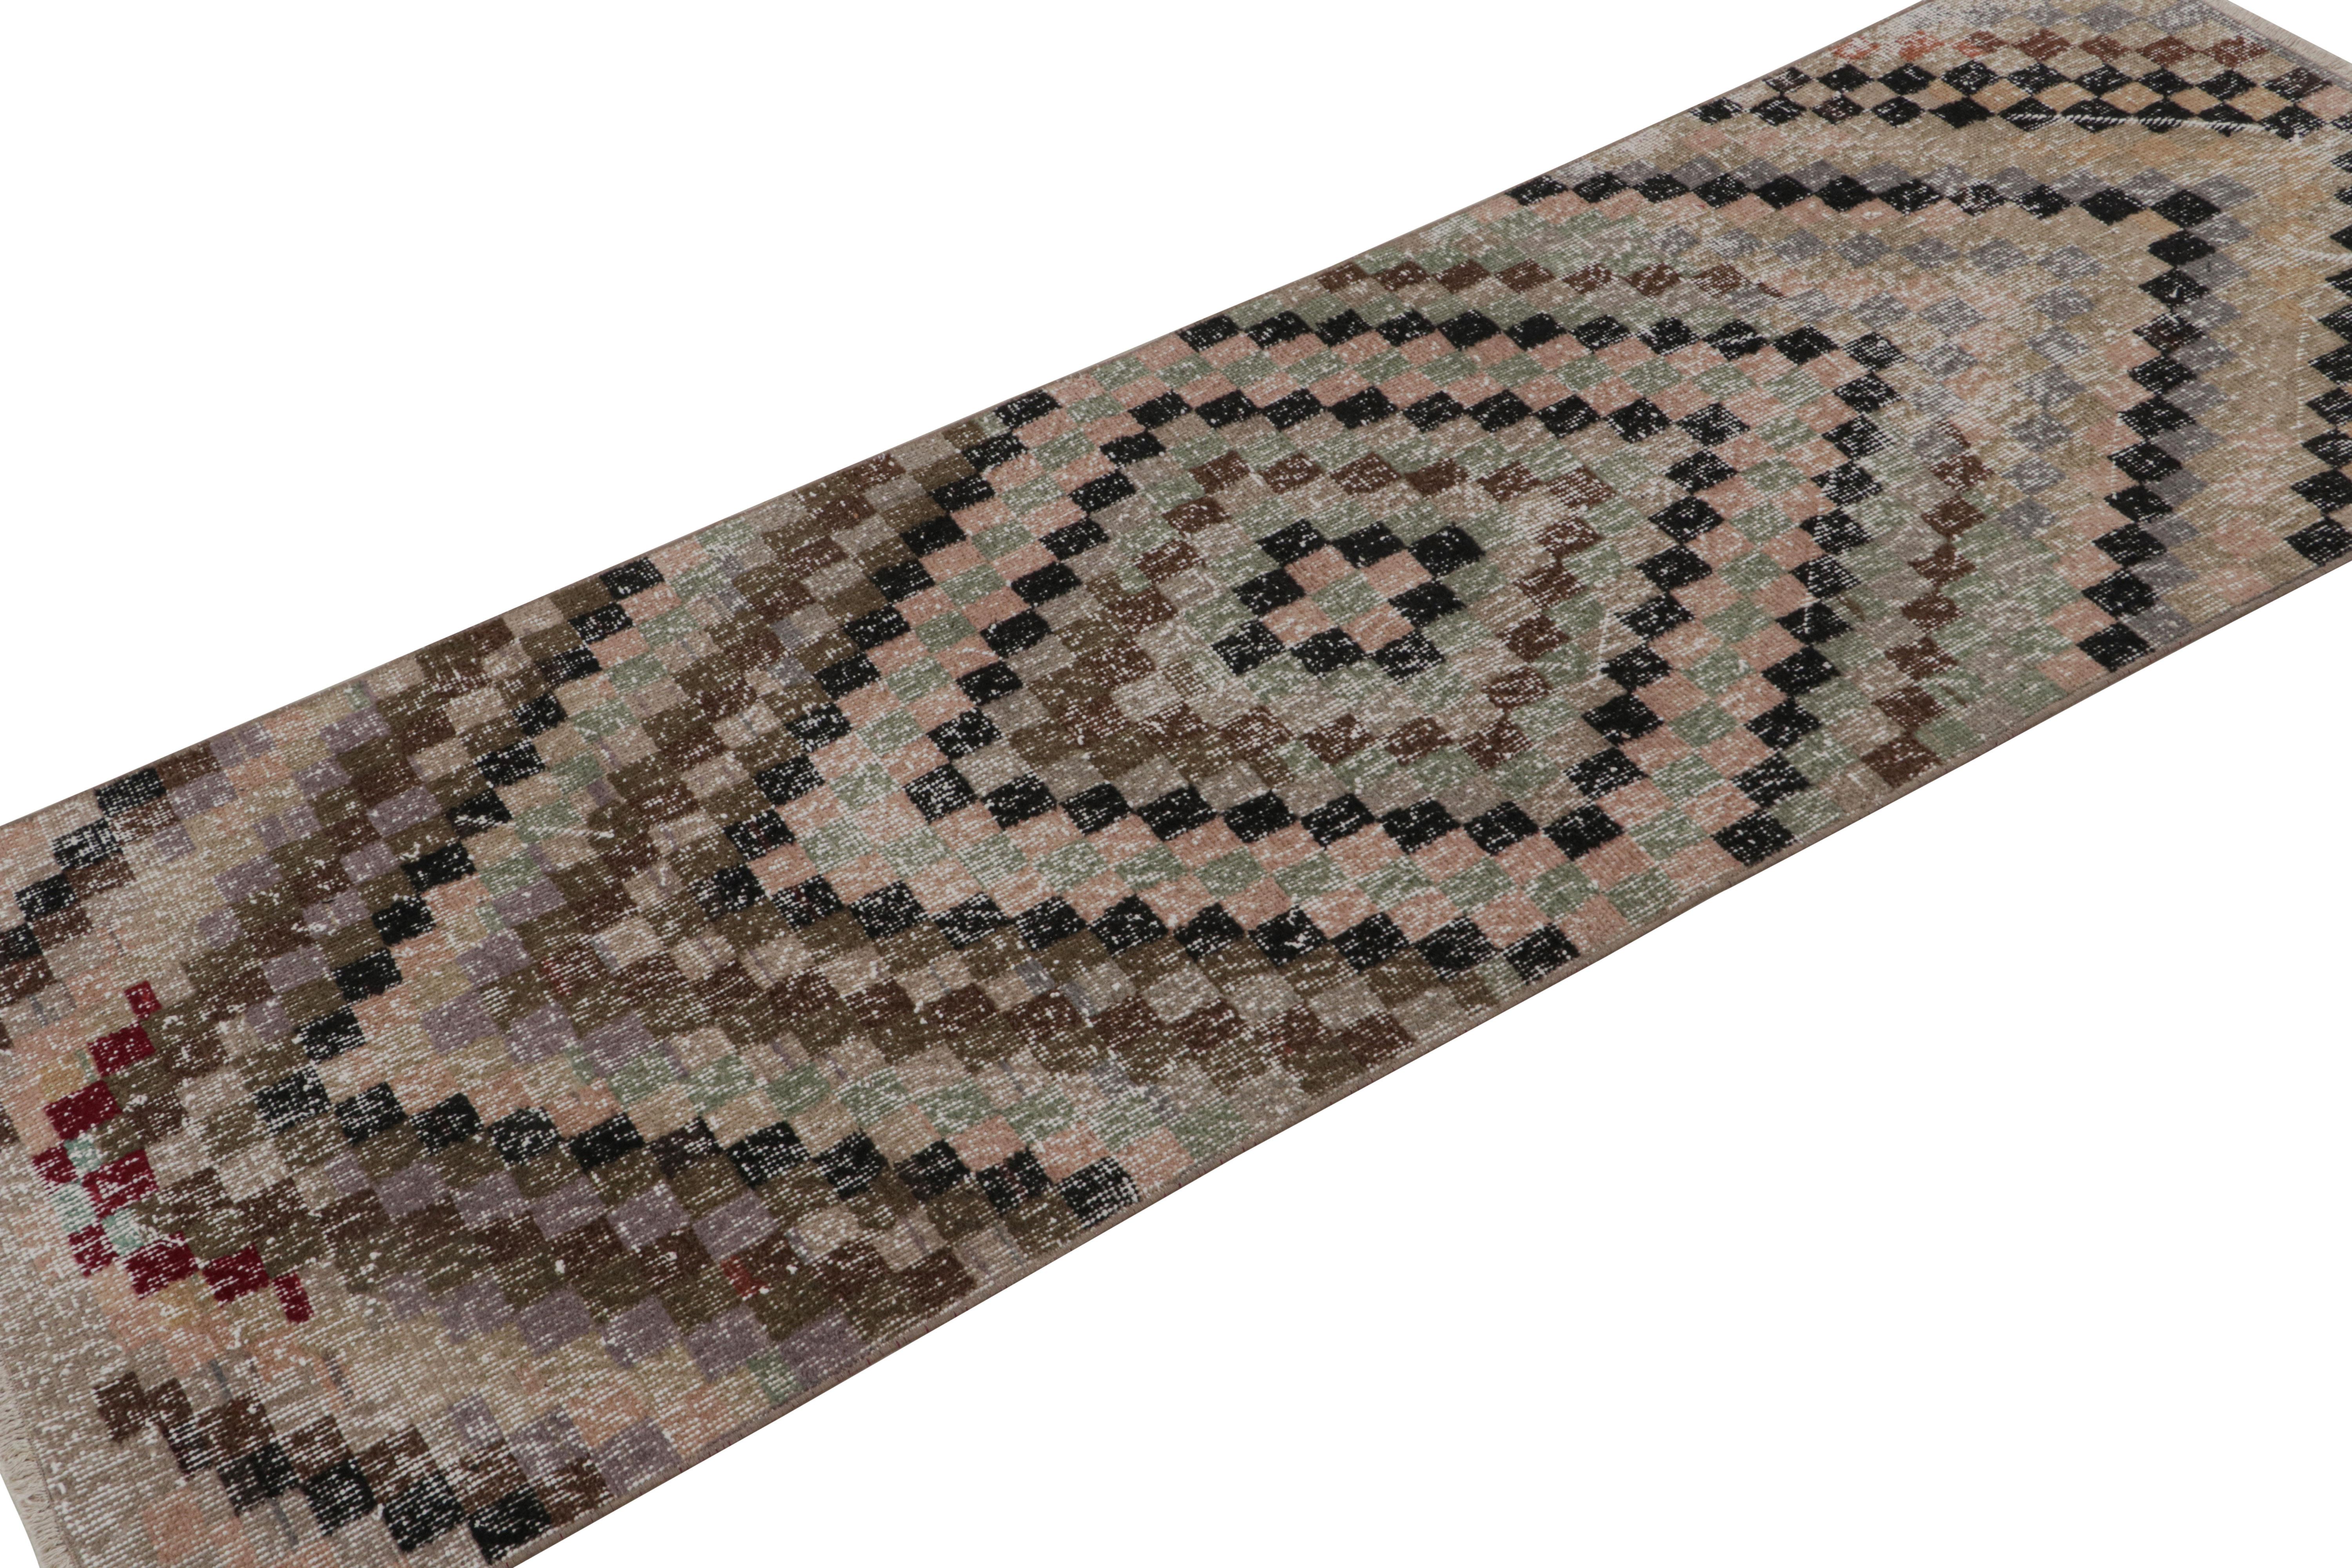 Handknotted in wool, this 2x7 vintage runner originates from Turkey, circa 1960-1970, and is believed to be among the works of mid-century designer Zeki Múren. 

On the Design:

Connoisseurs will admire this vintage Zeki Múren’s design which